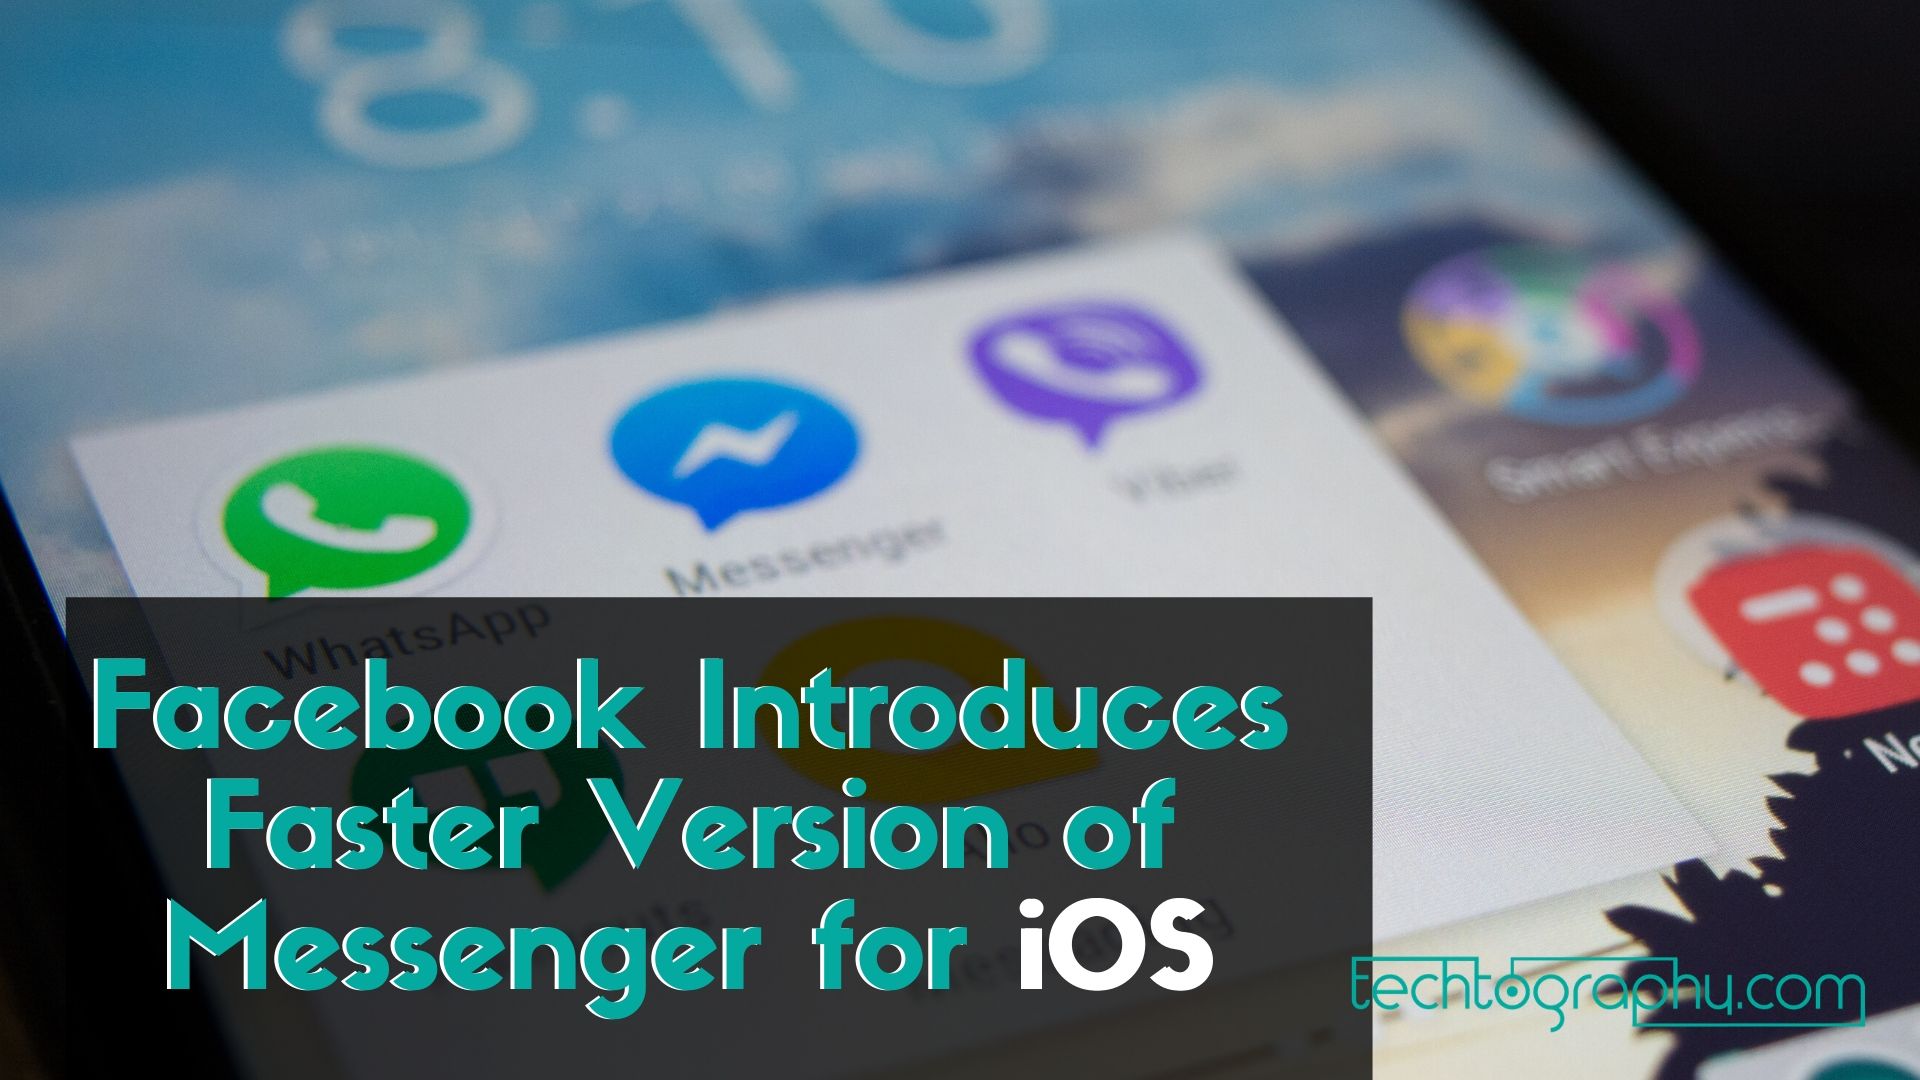 Facebook Introduces Faster Version of Messenger for iOS